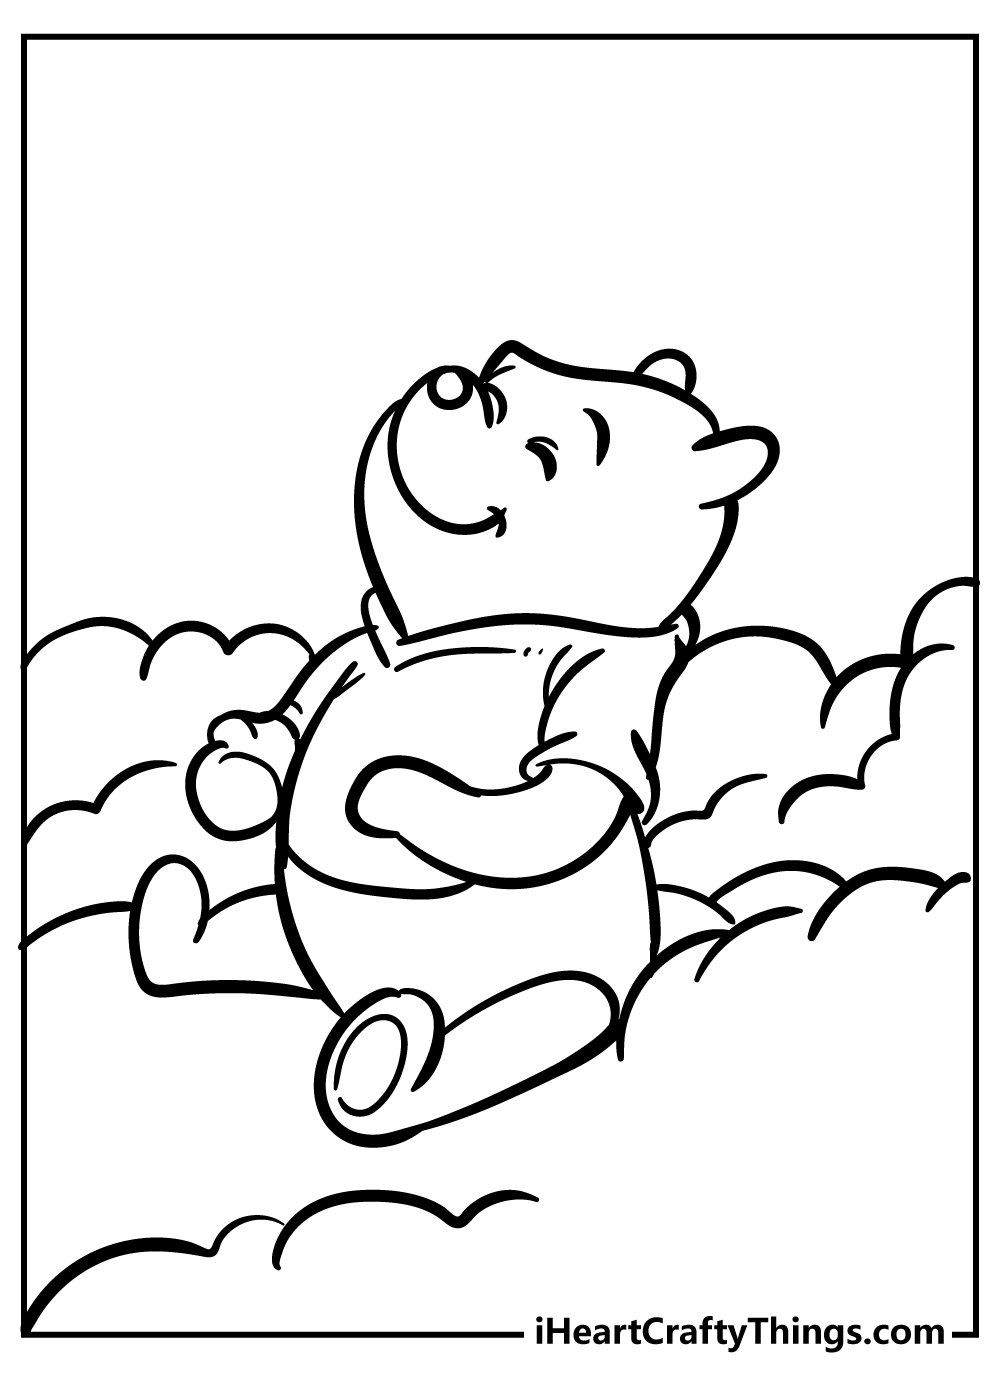 Winnie The Pooh coloring pages free printable